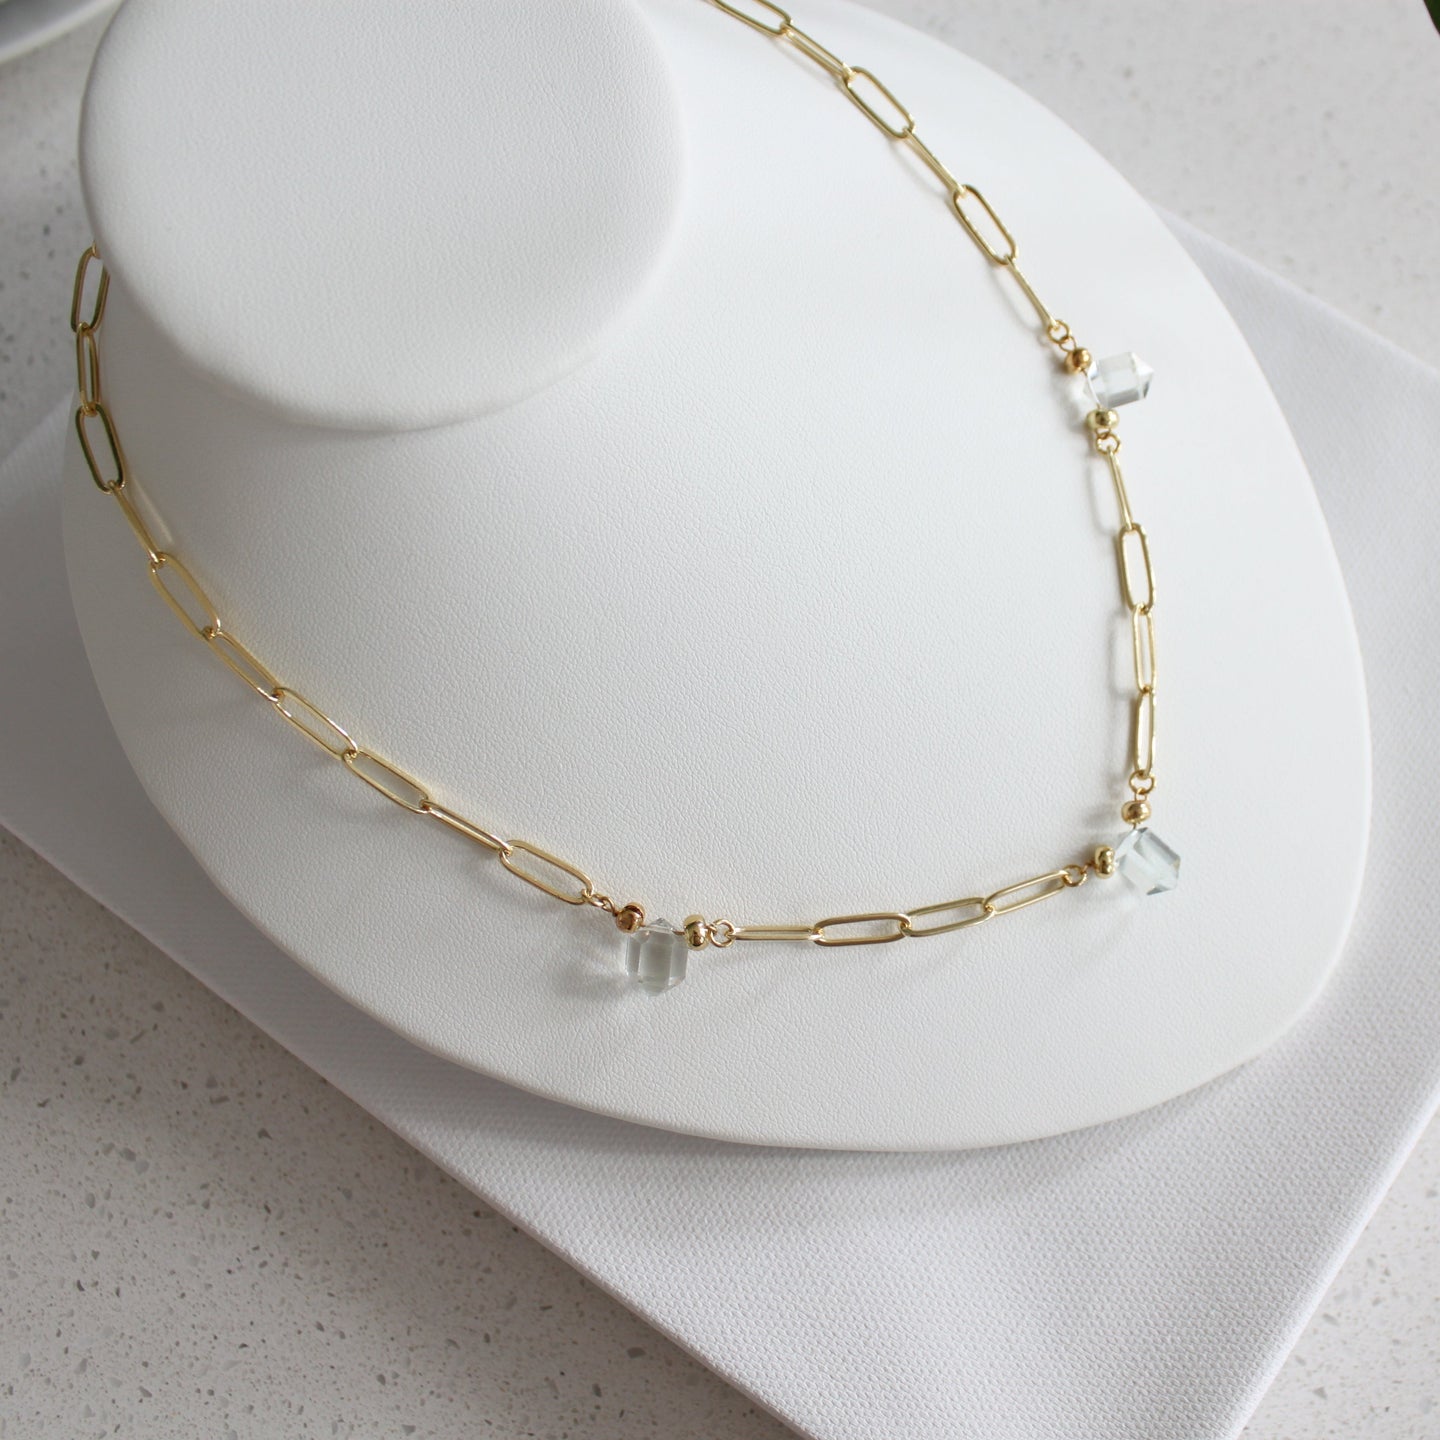 The Glacier Quartz and 14K Gold Filled Paperclip Necklace.